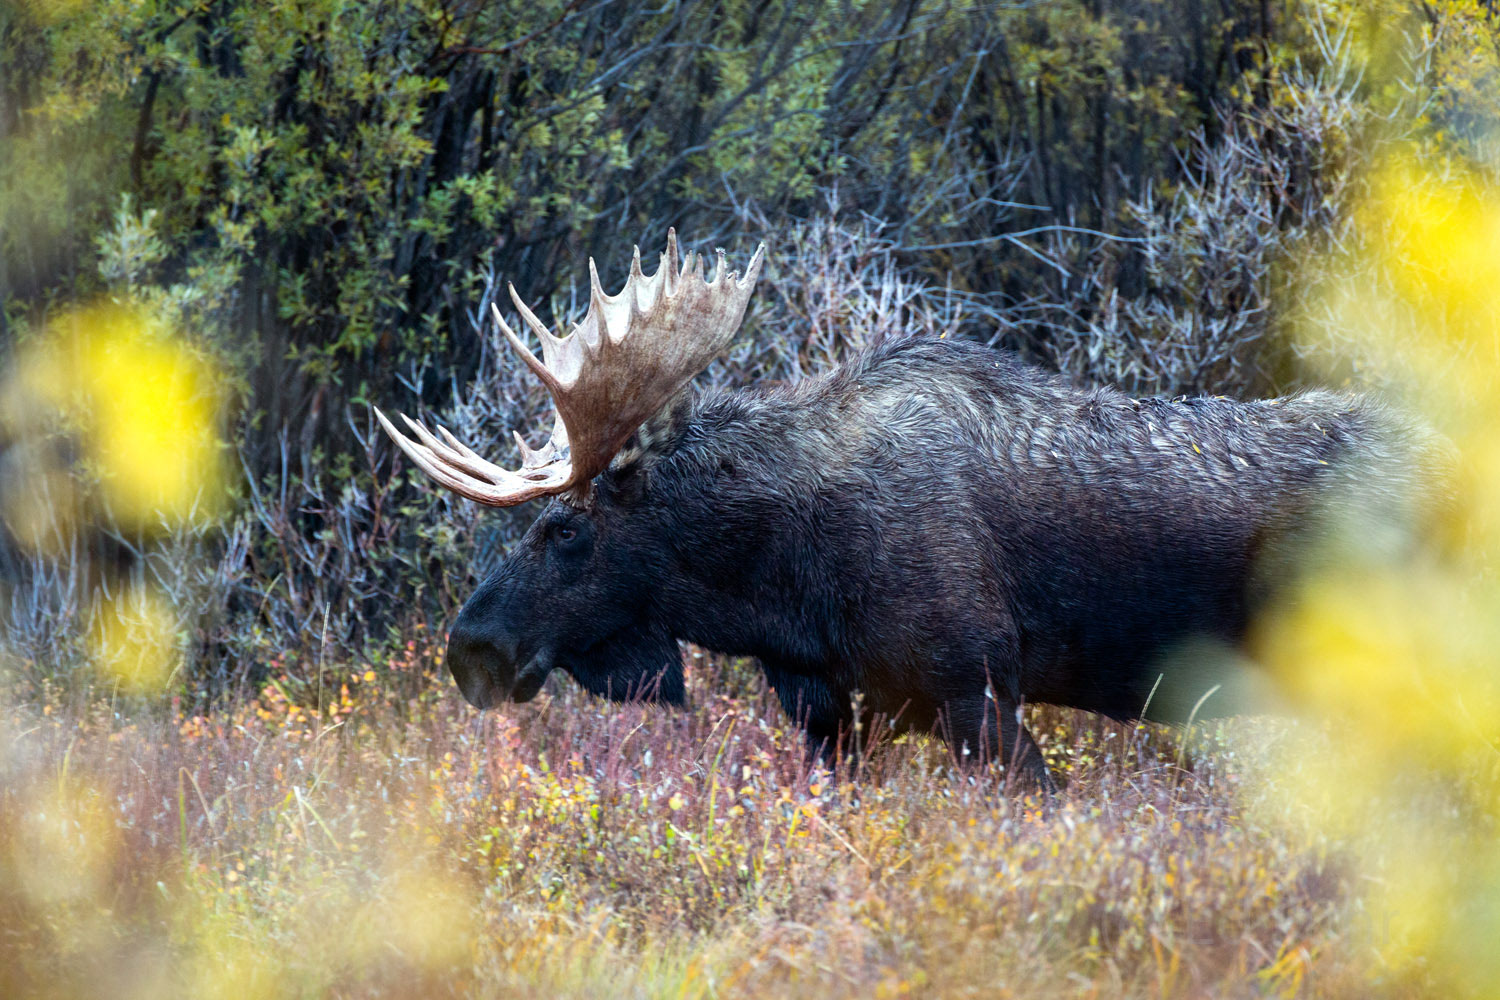 One of the largest moose in the Park makes it way through the rain and color of fall at Willow Flats.